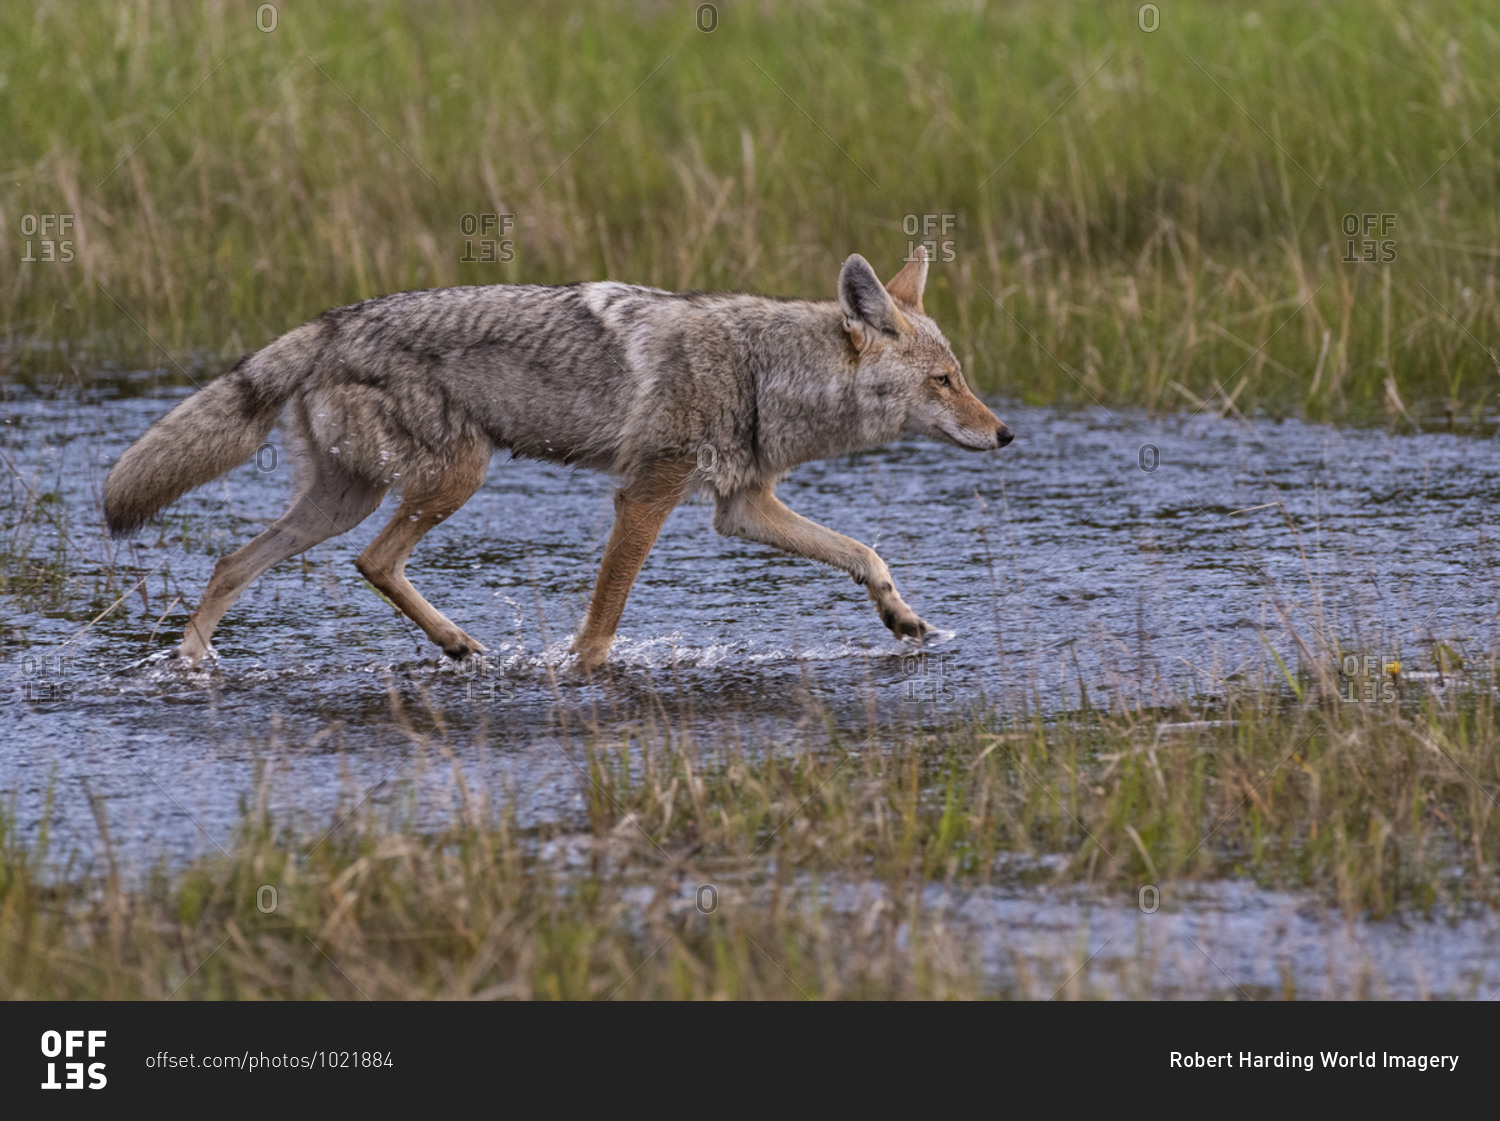 Coyote (Canis latrans) running through a flooded meadow, Banff National Park, UNESCO World Heritage Site, Alberta, Canada, North America